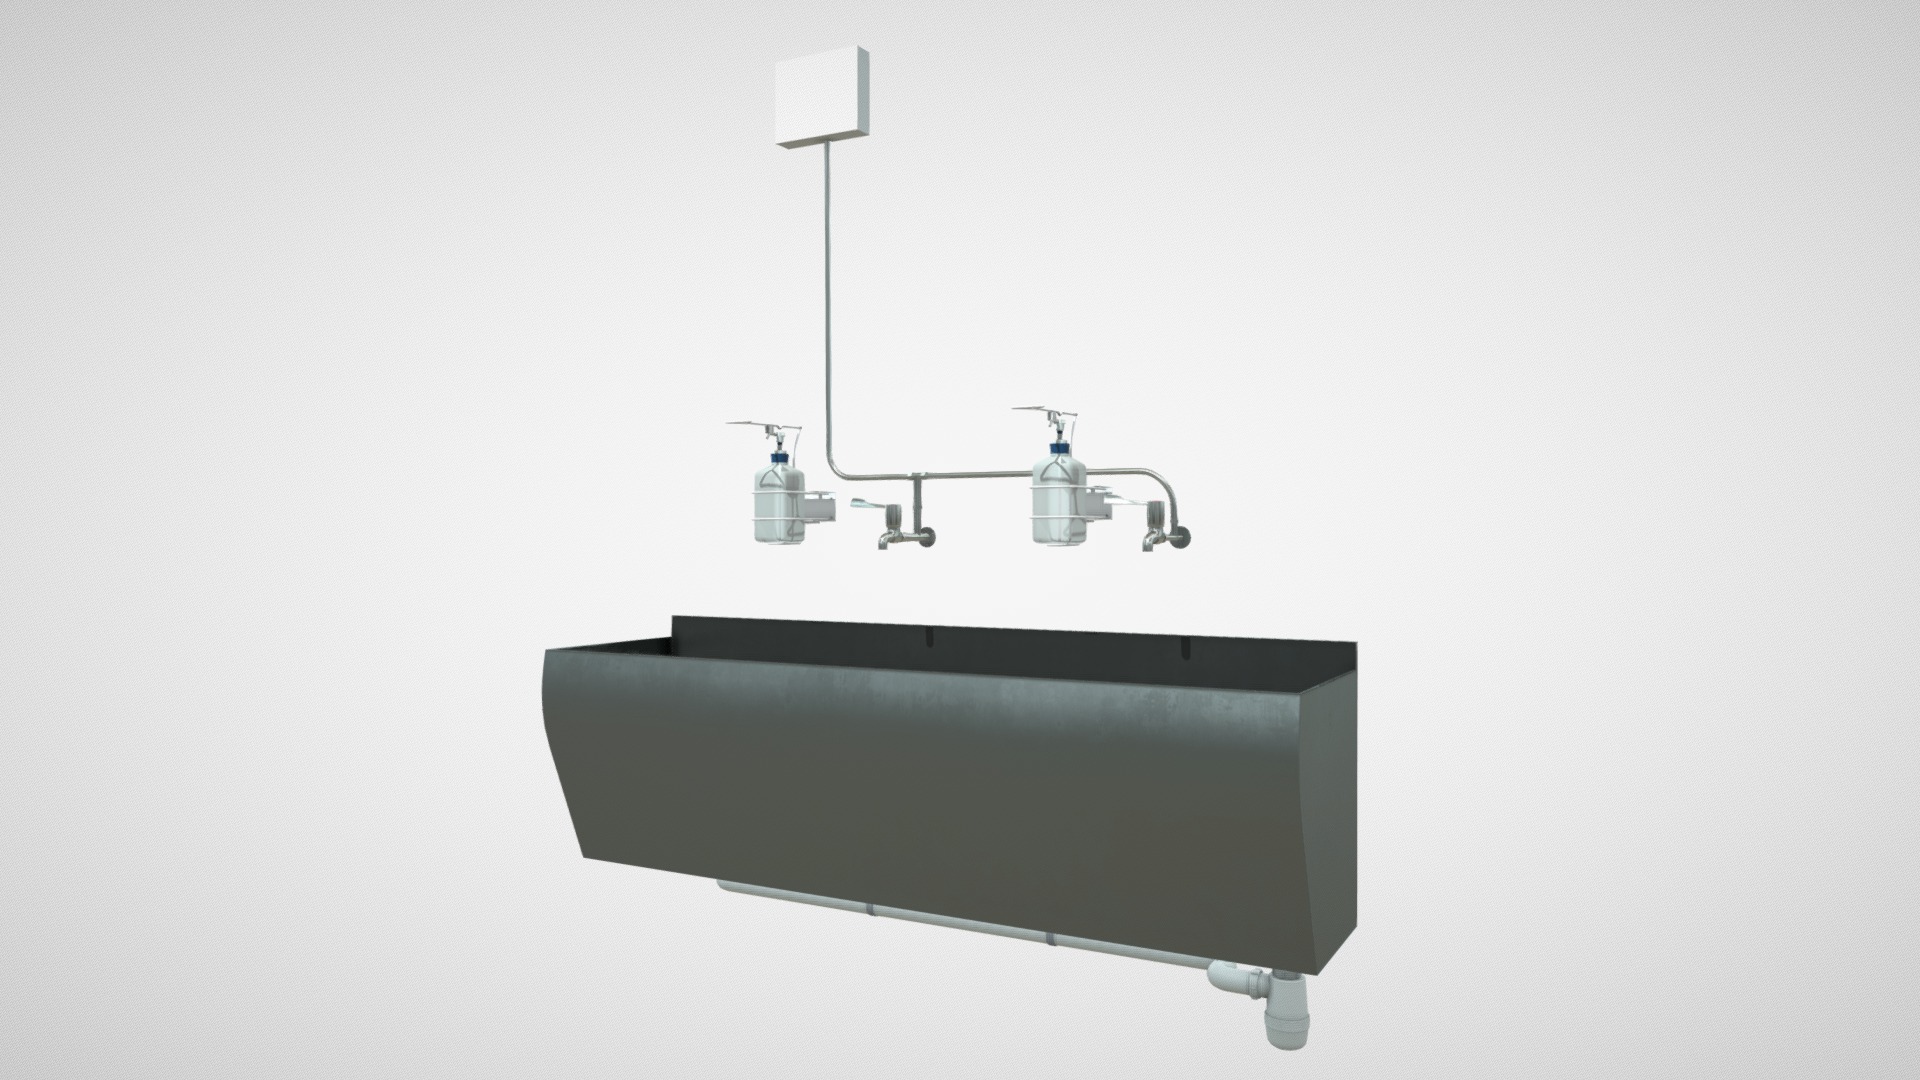 3D model Surgery hand washing  models - This is a 3D model of the Surgery hand washing  models. The 3D model is about a black rectangular object with a light on top.